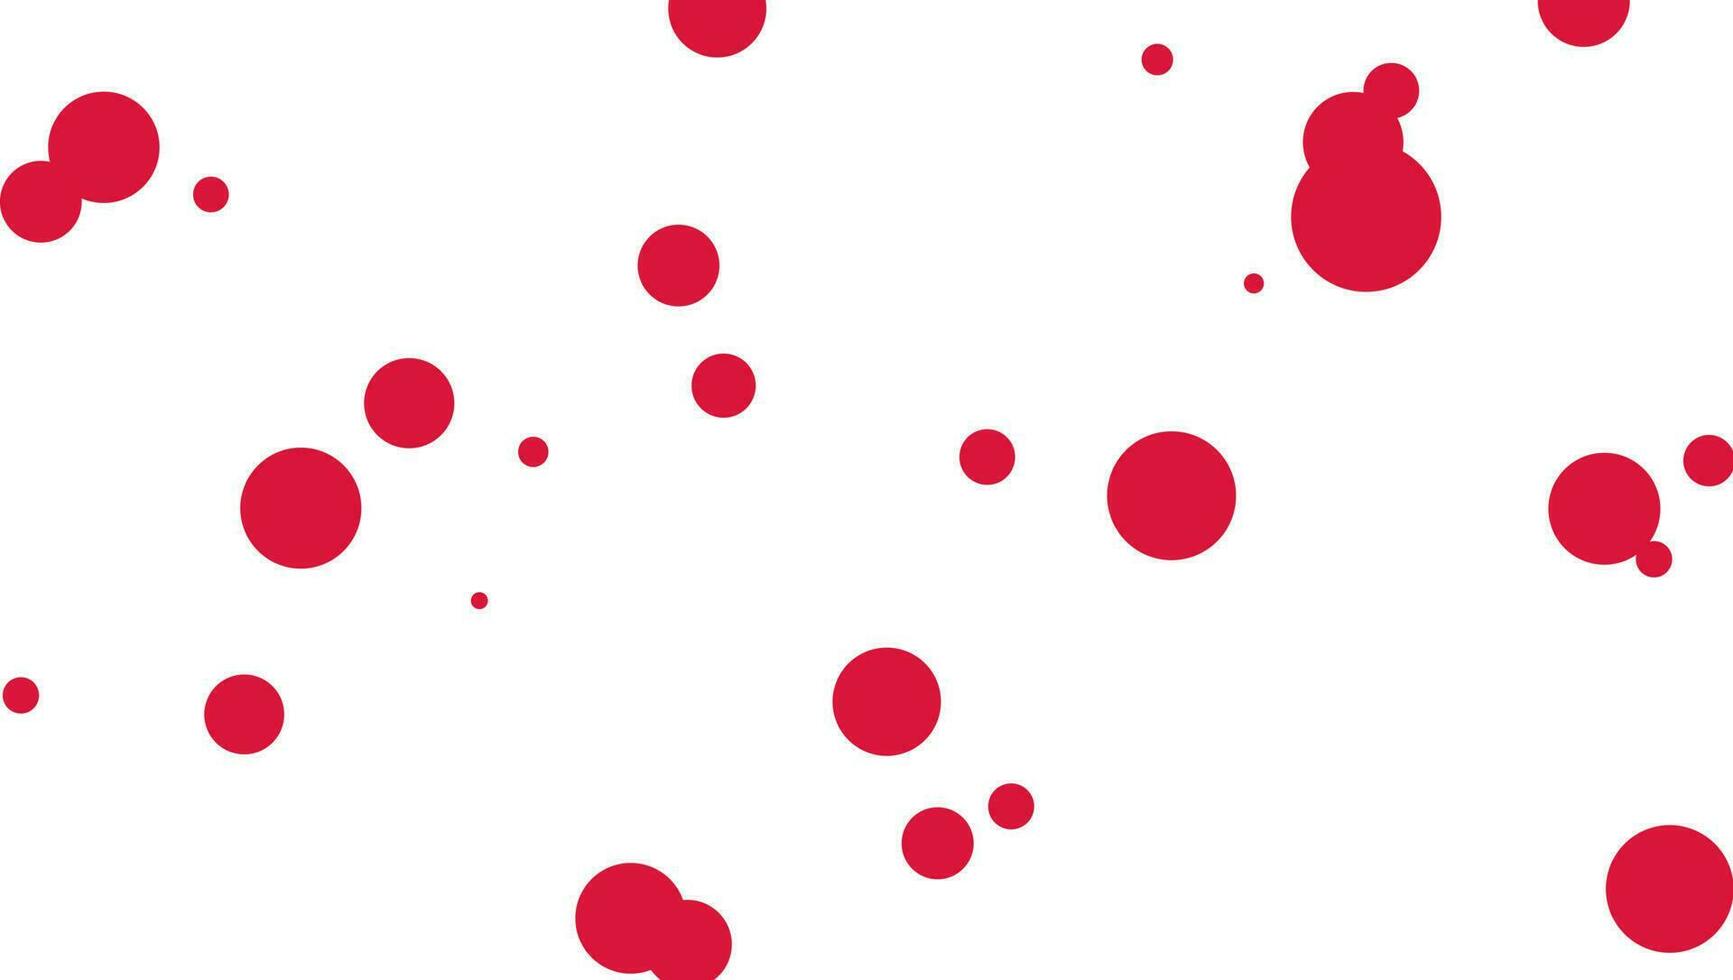 blood drops crimson red shapes over white background vector